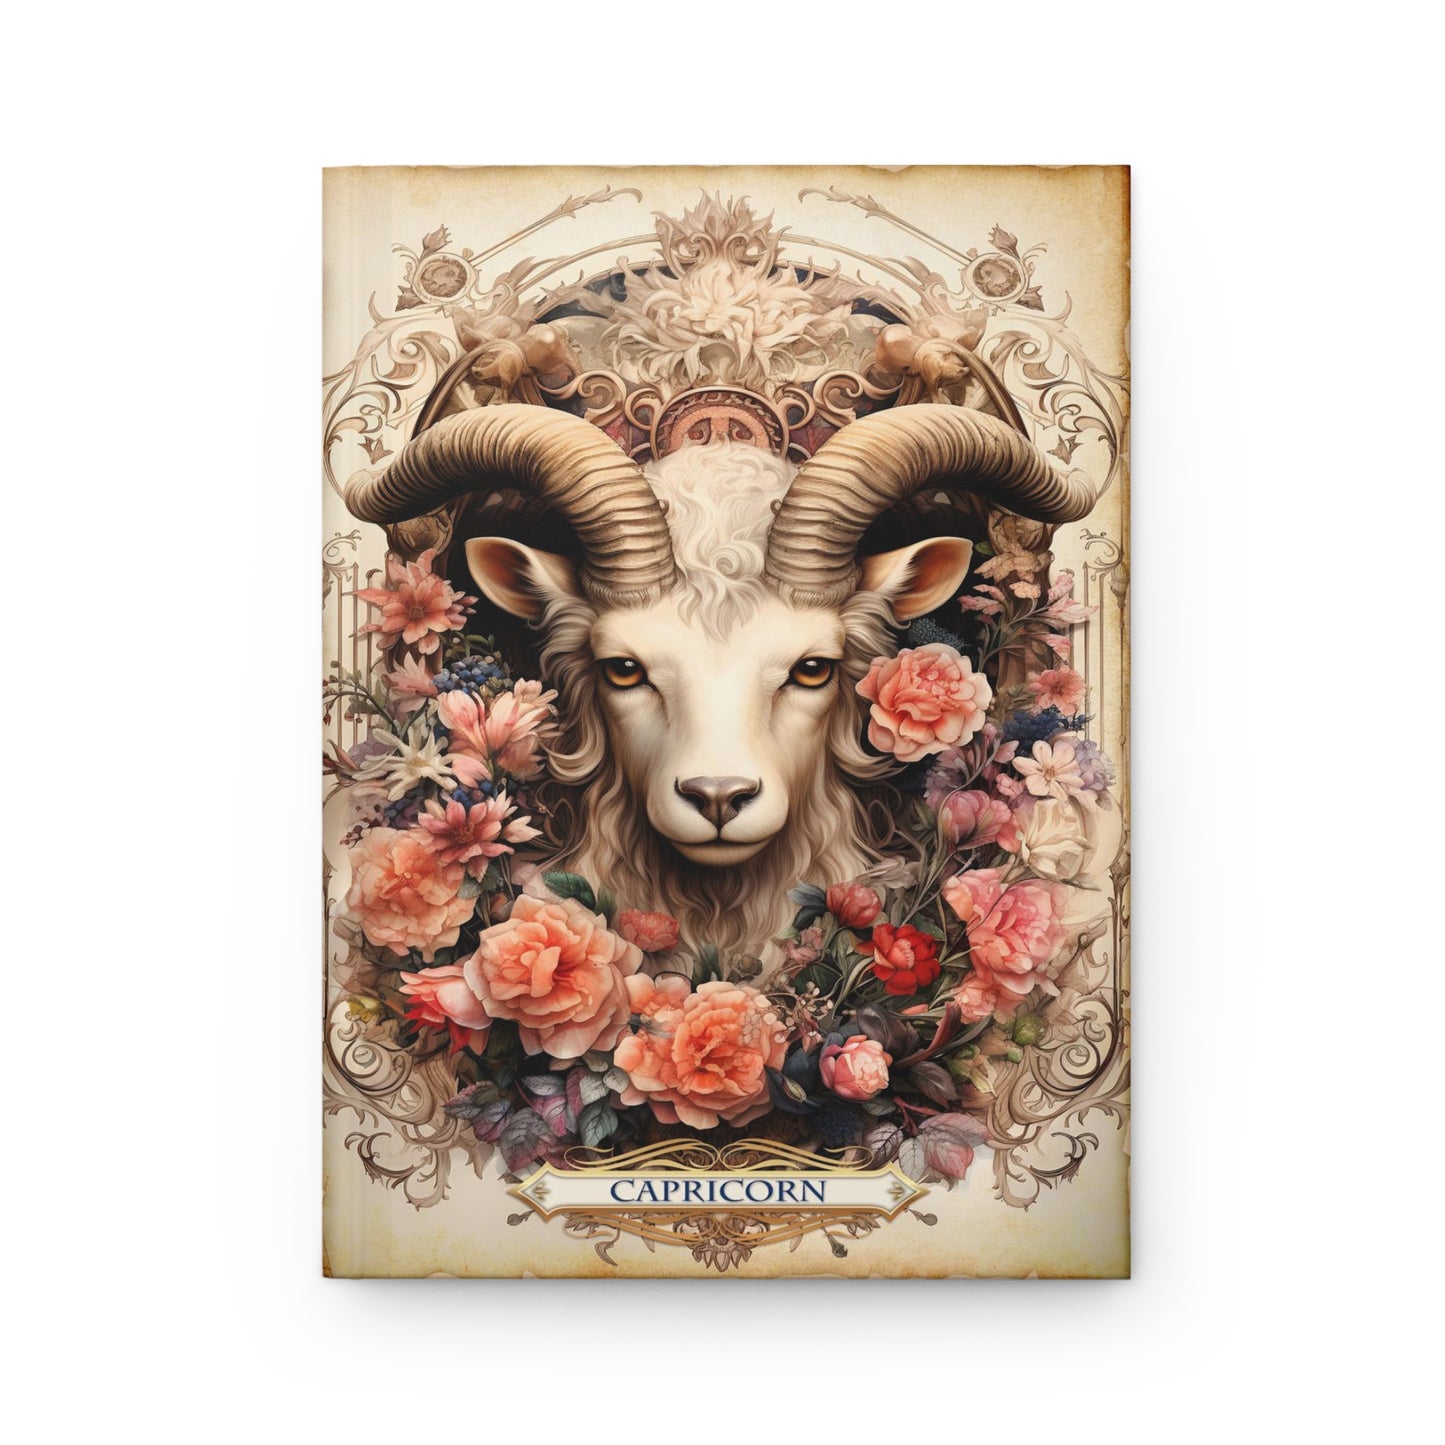 Capricorn - Floral Collection (Hardcover Journal Matte)